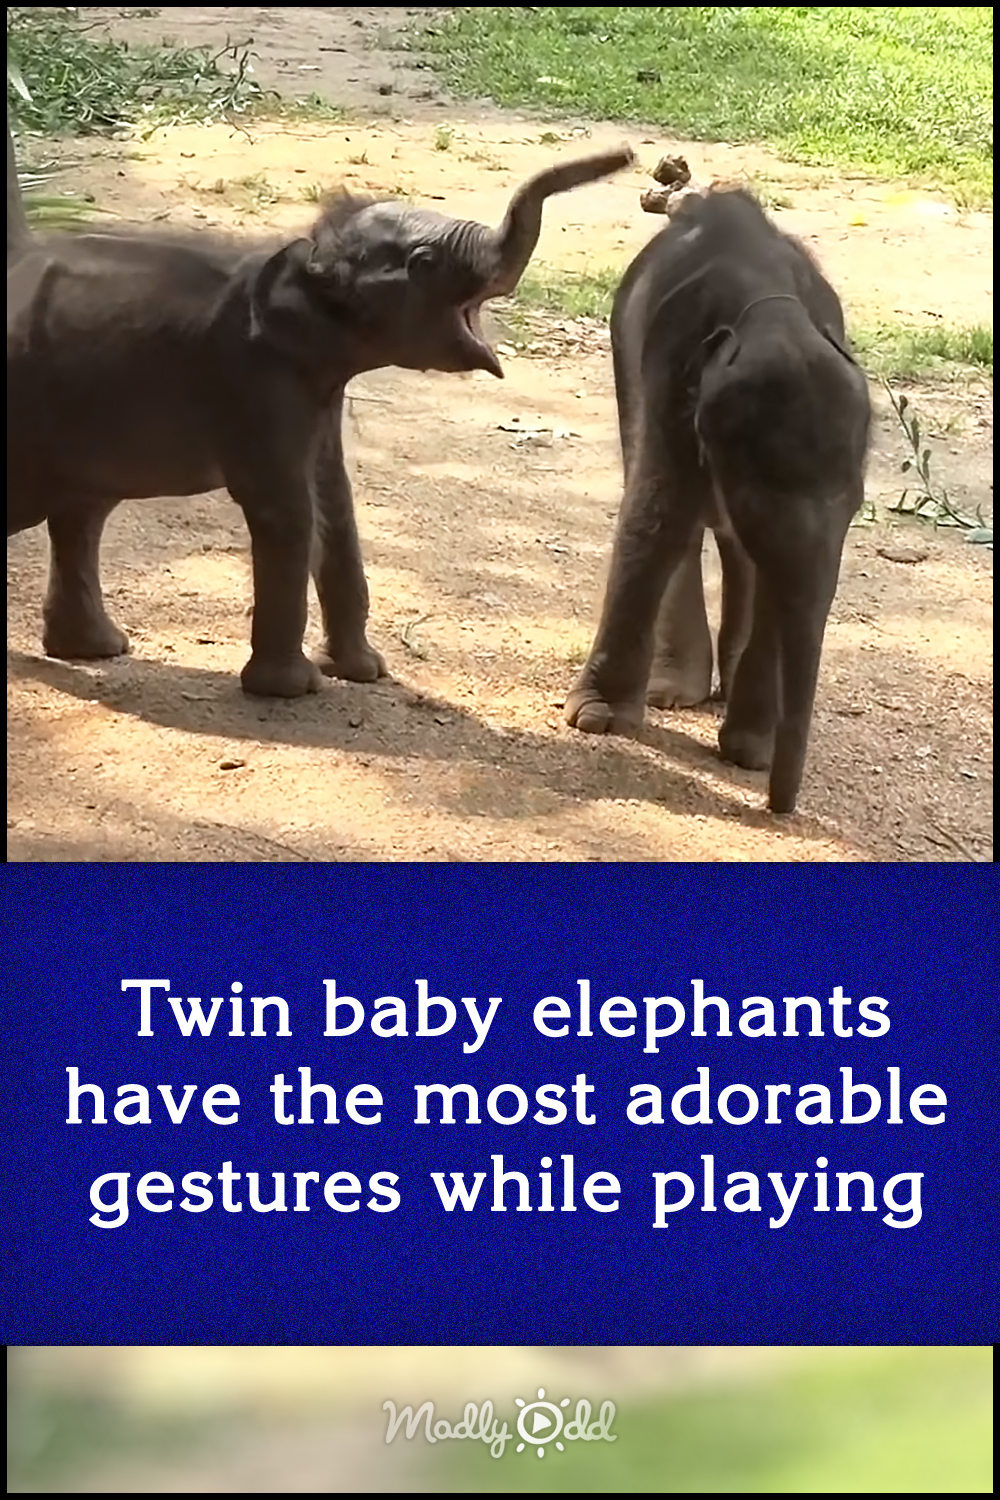 Twin baby elephants have the most adorable gestures while playing